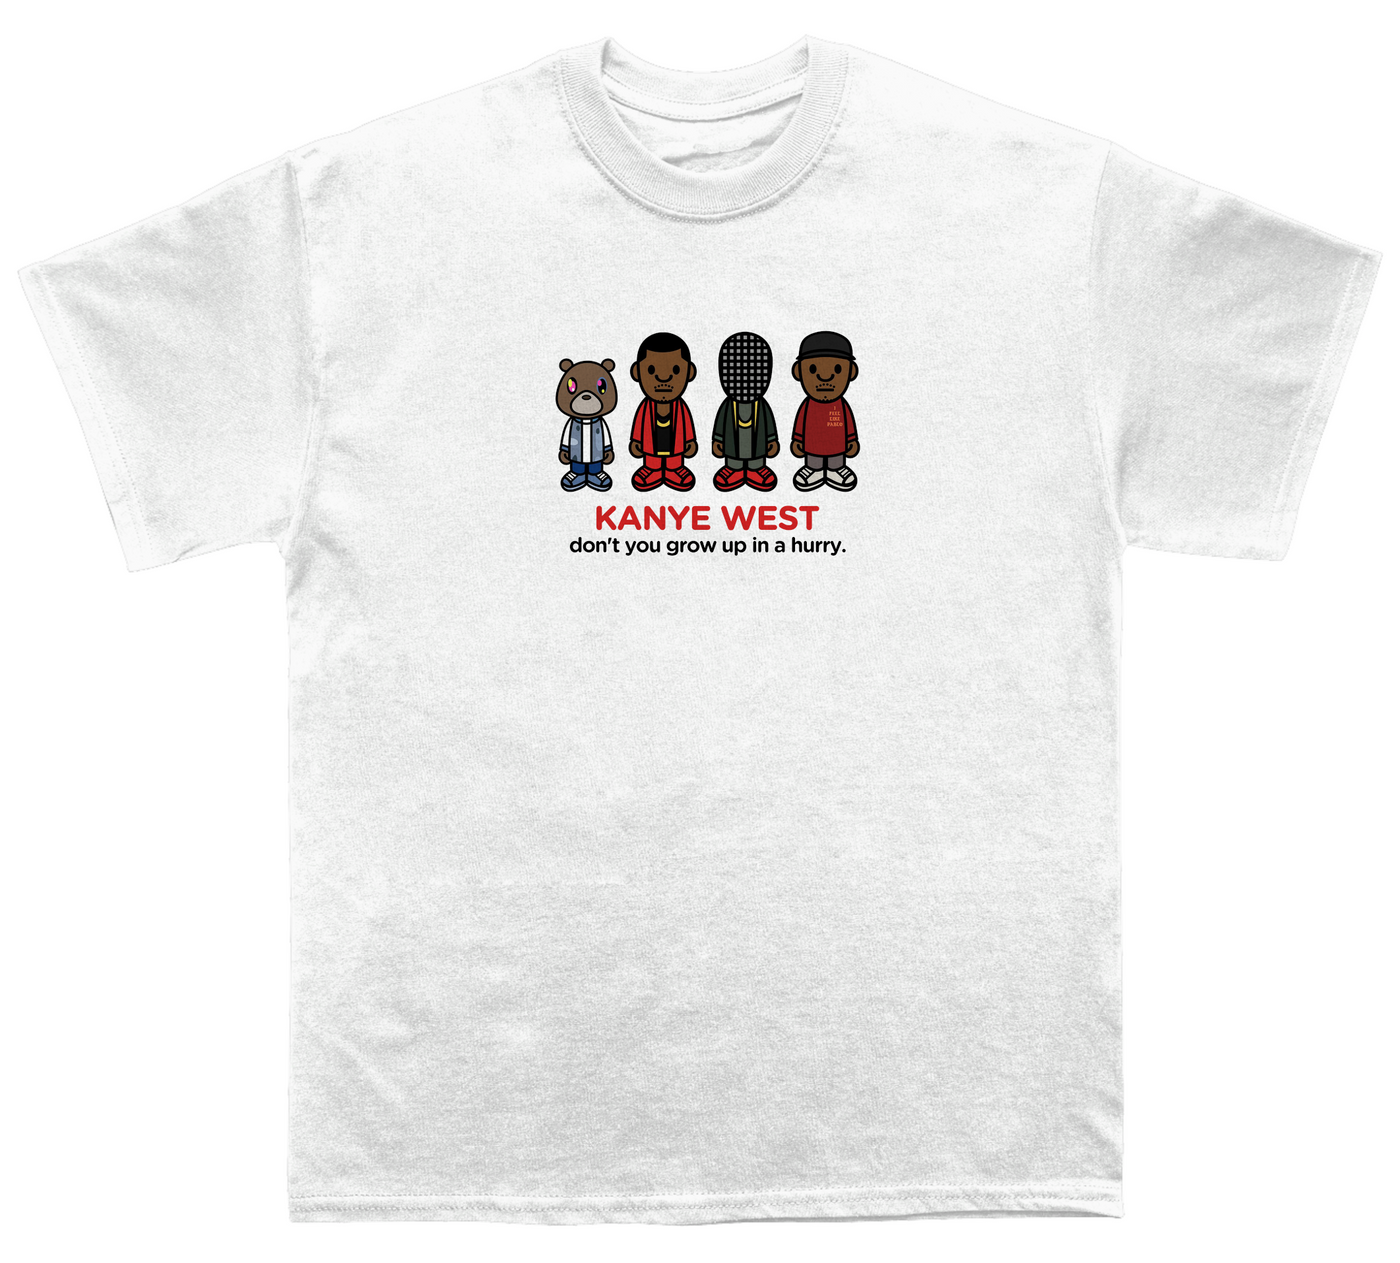 Ye Babymilo "Don't You Grow Up In a Hurry" T-shirt